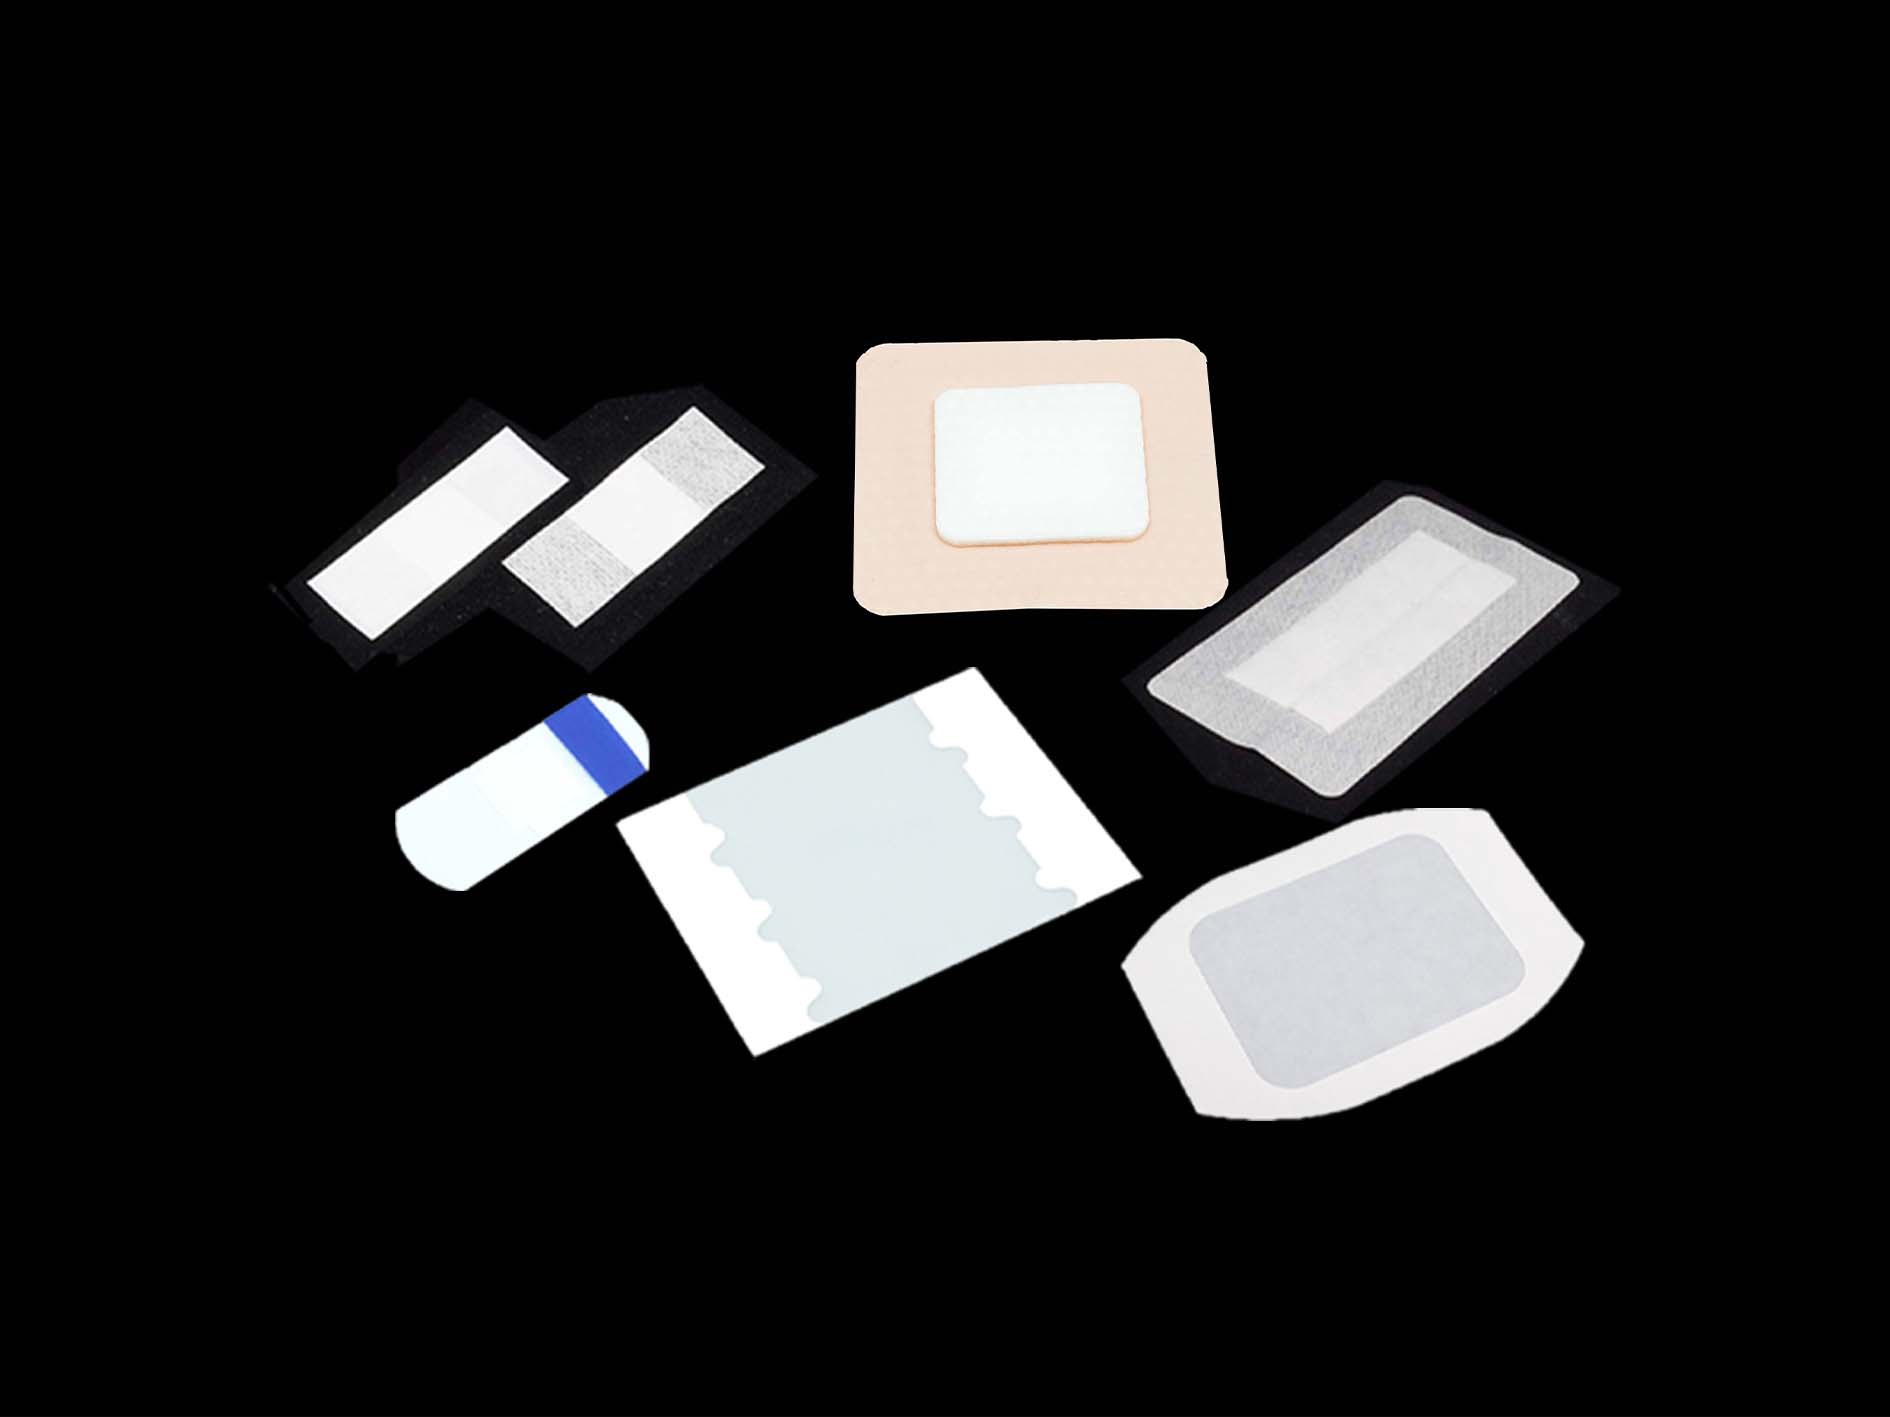 OUR MEDICAL SILICONE BASED SOLUTIONS